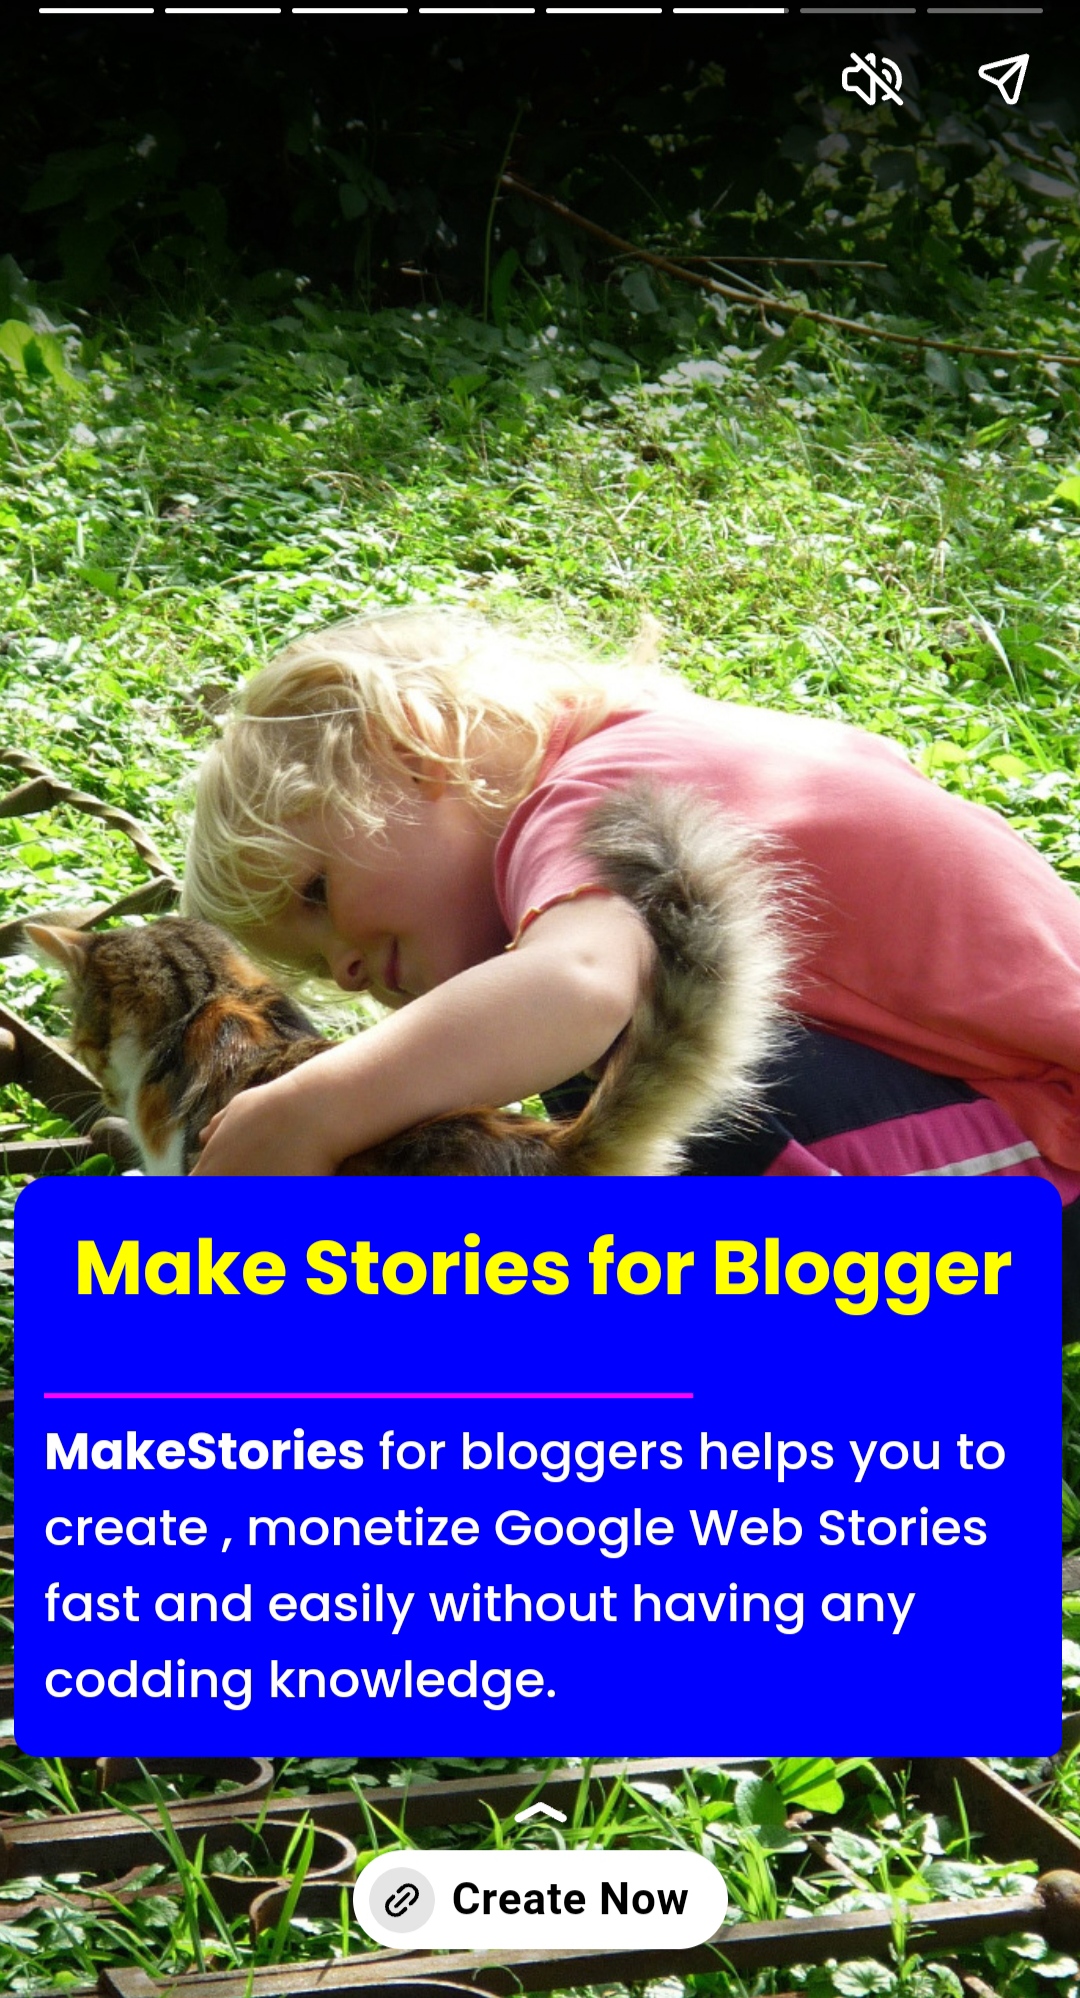 Web stories generator for Blogger image